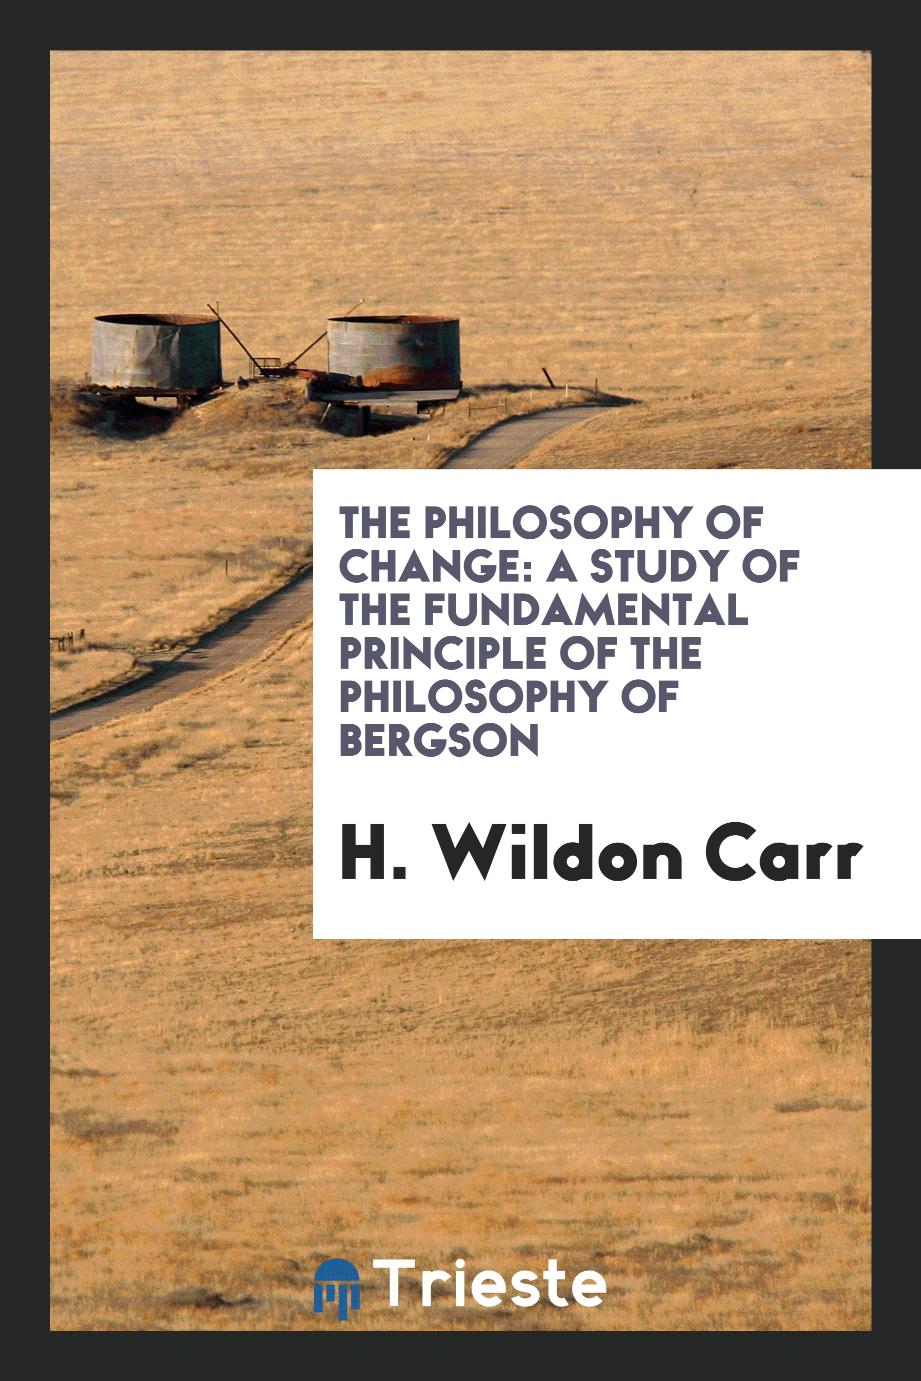 The philosophy of change: a study of the fundamental principle of the philosophy of Bergson